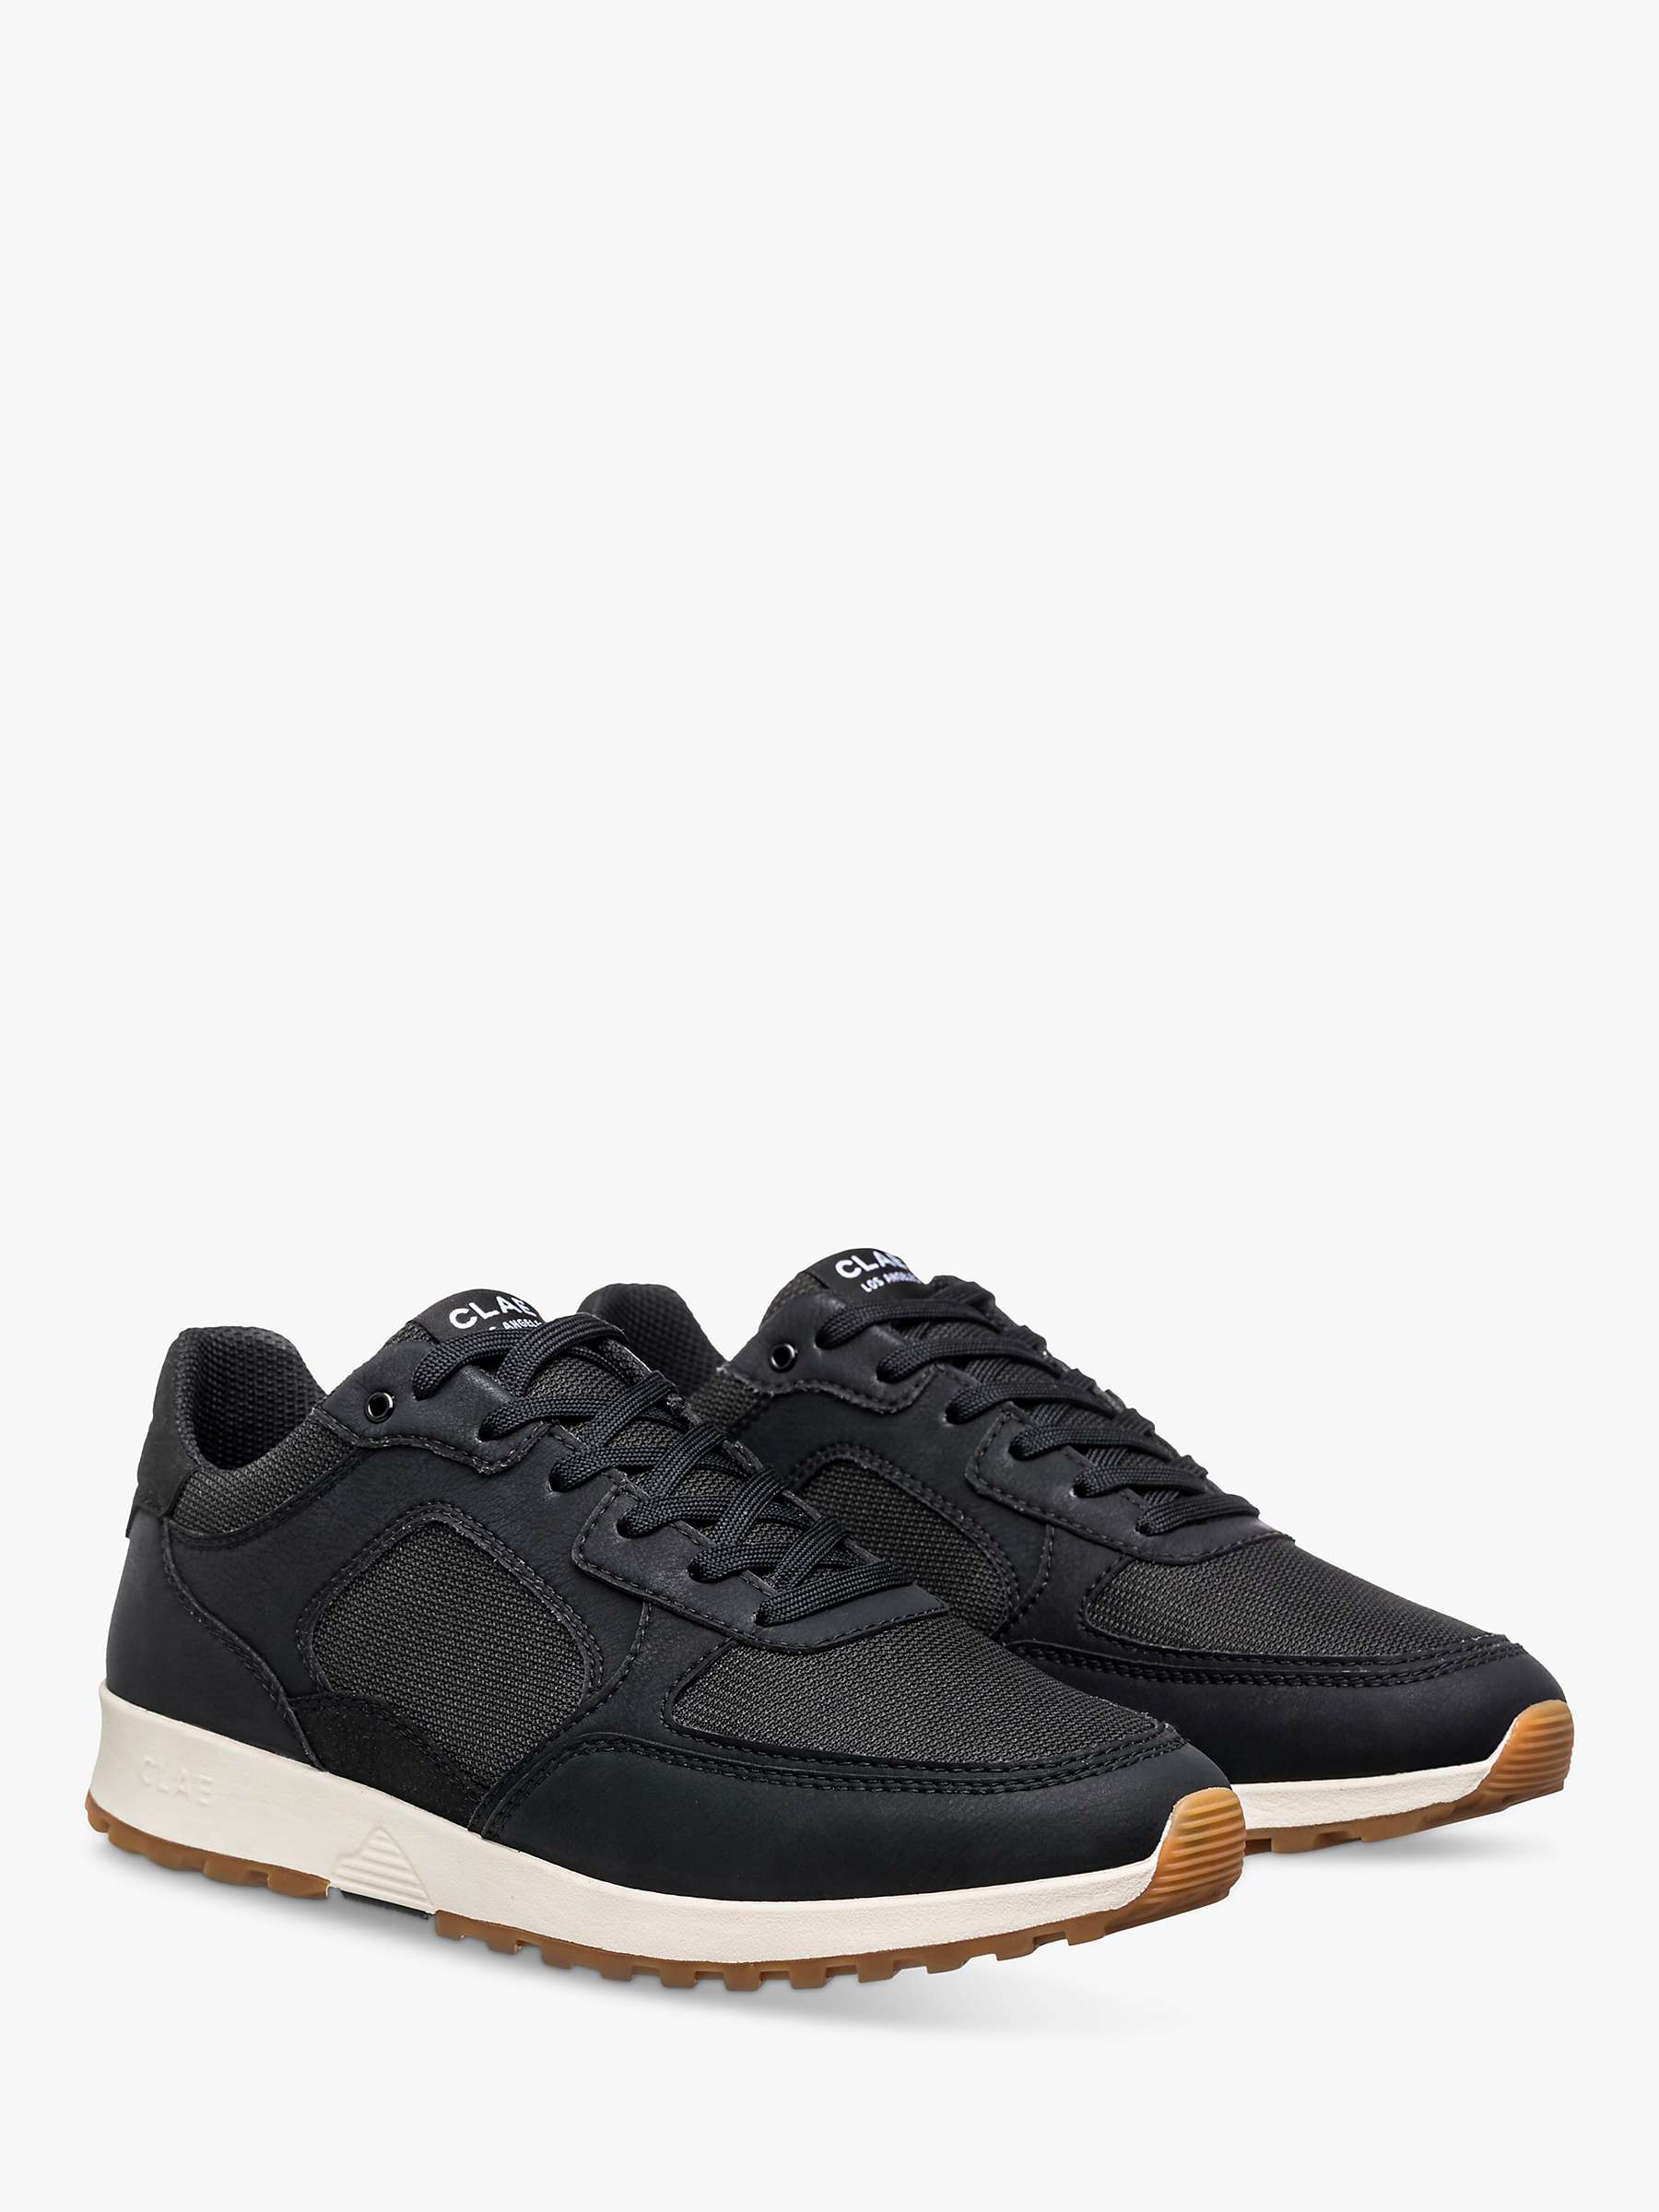 CLAE Joshua Lace Up Suede Trainers, Black at John Lewis & Partners